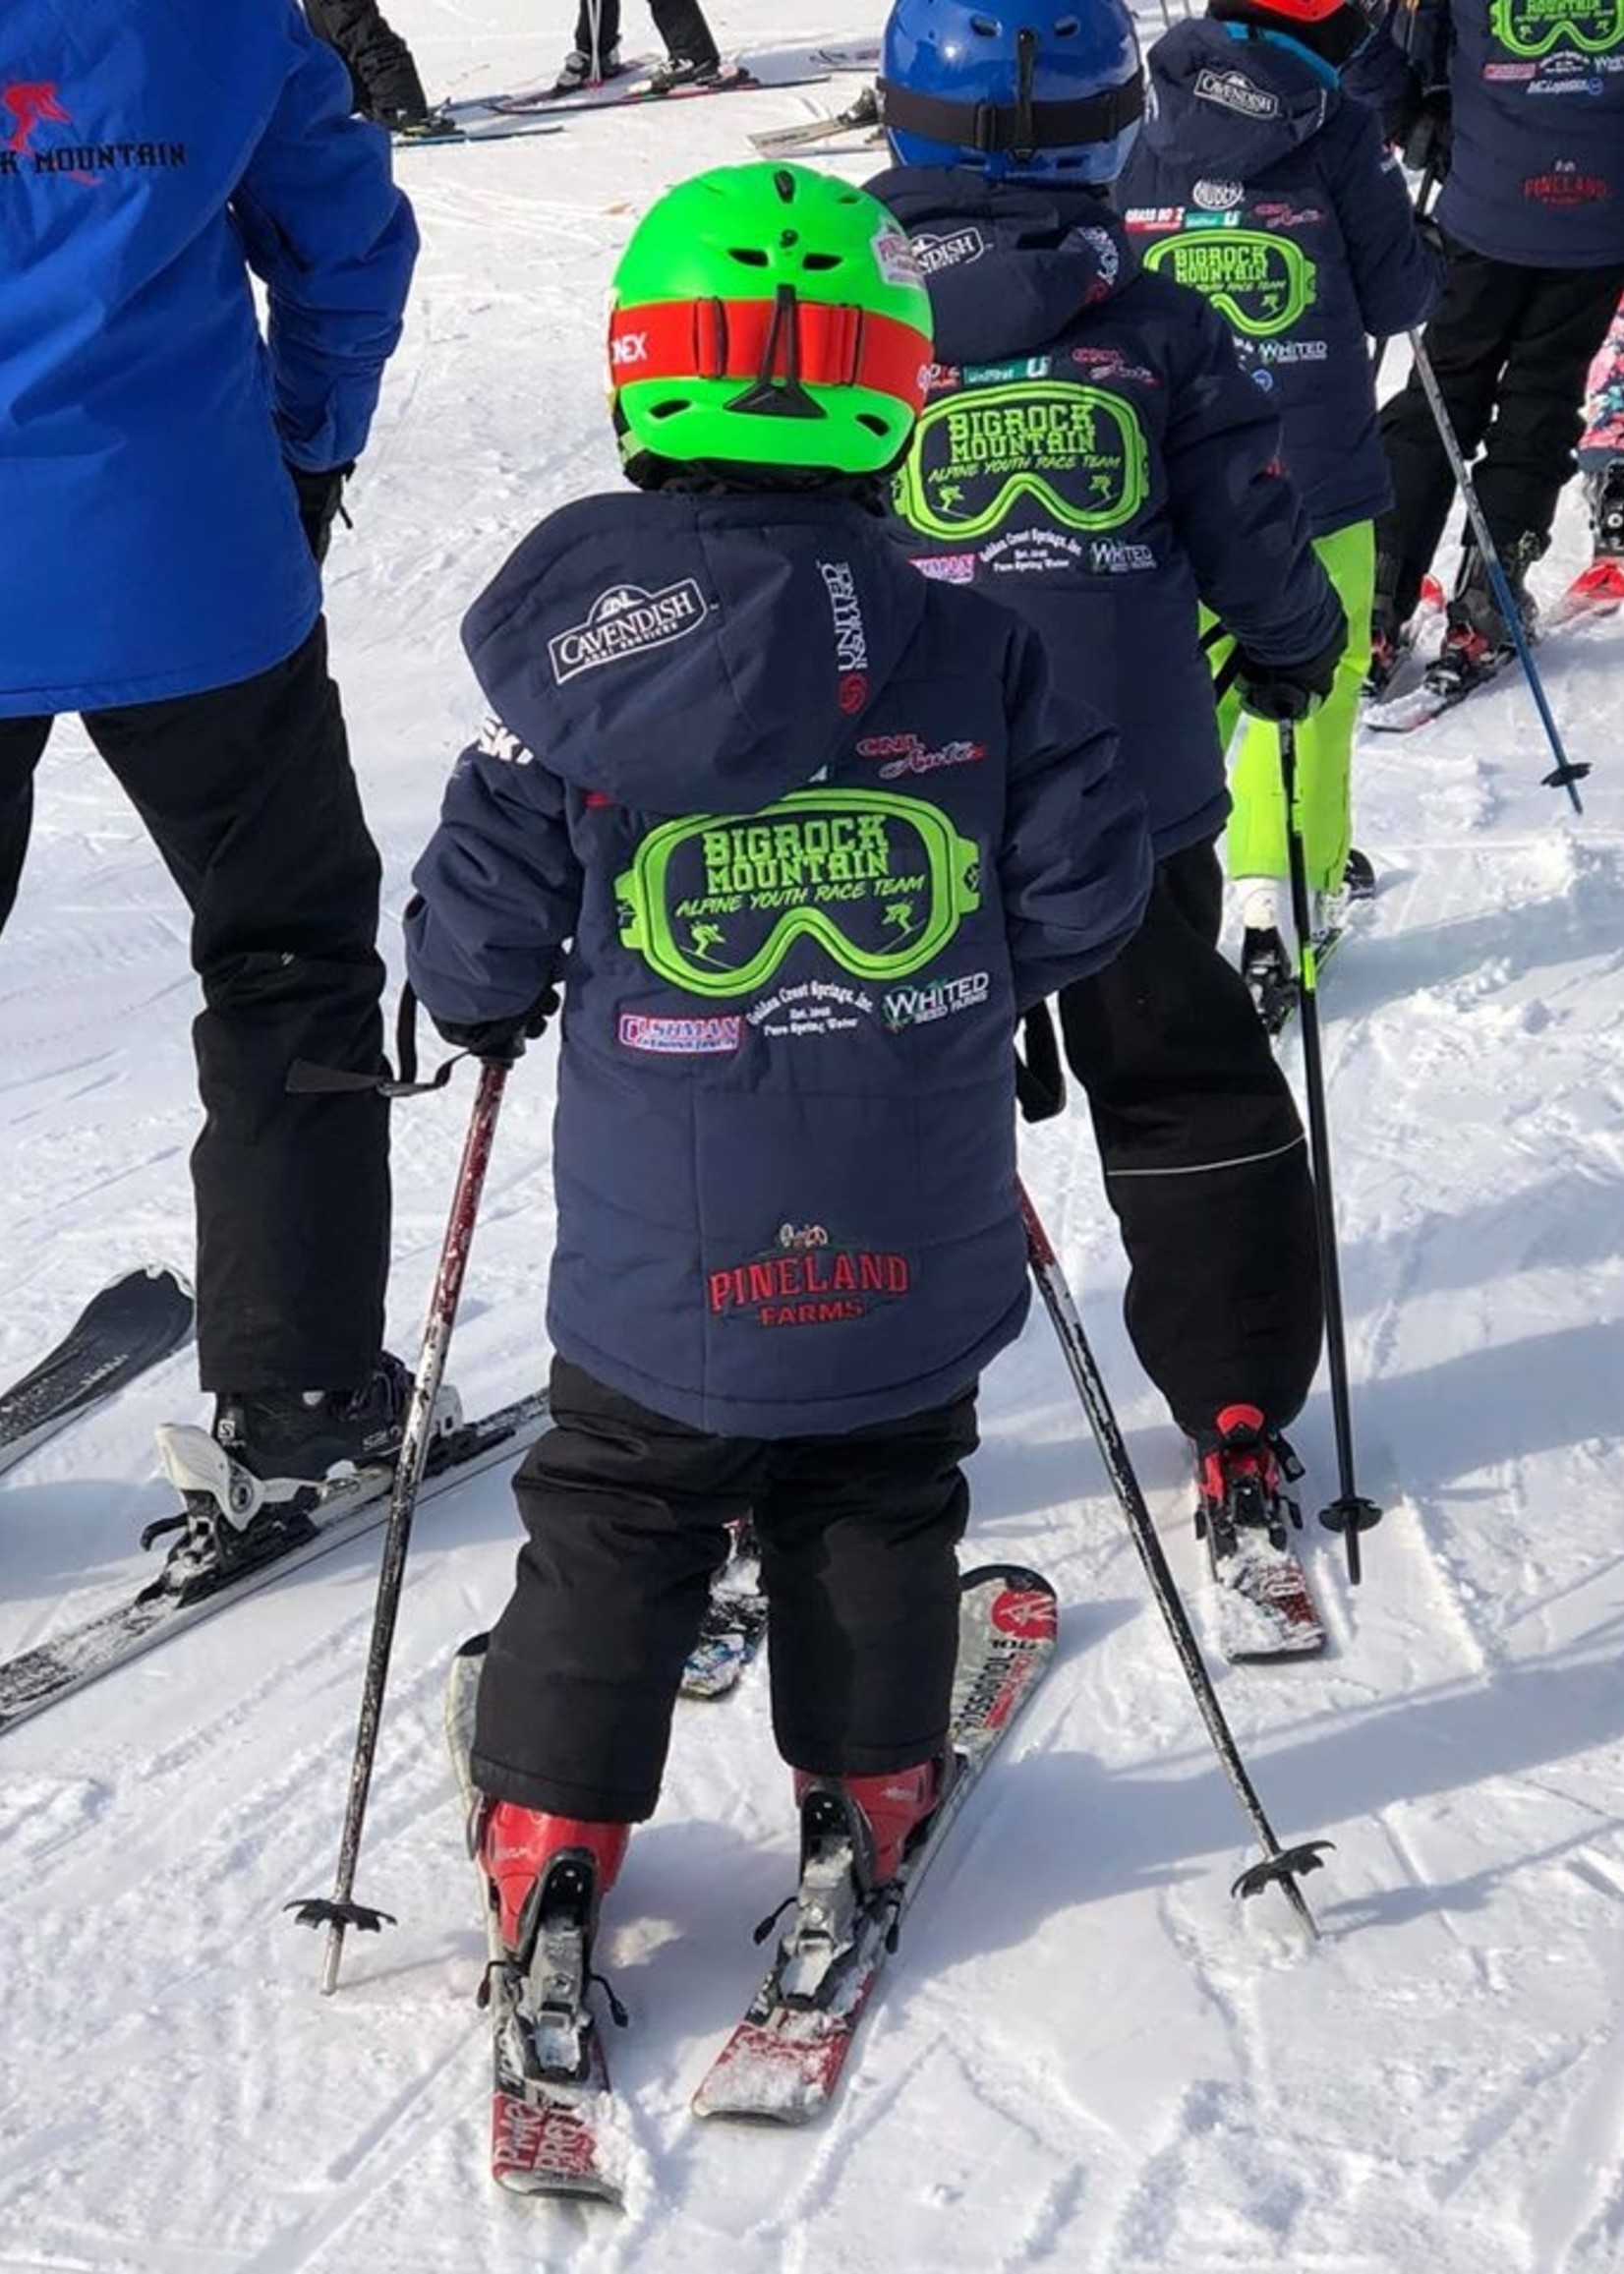 Youth Ski Race Program (with lift tickets)